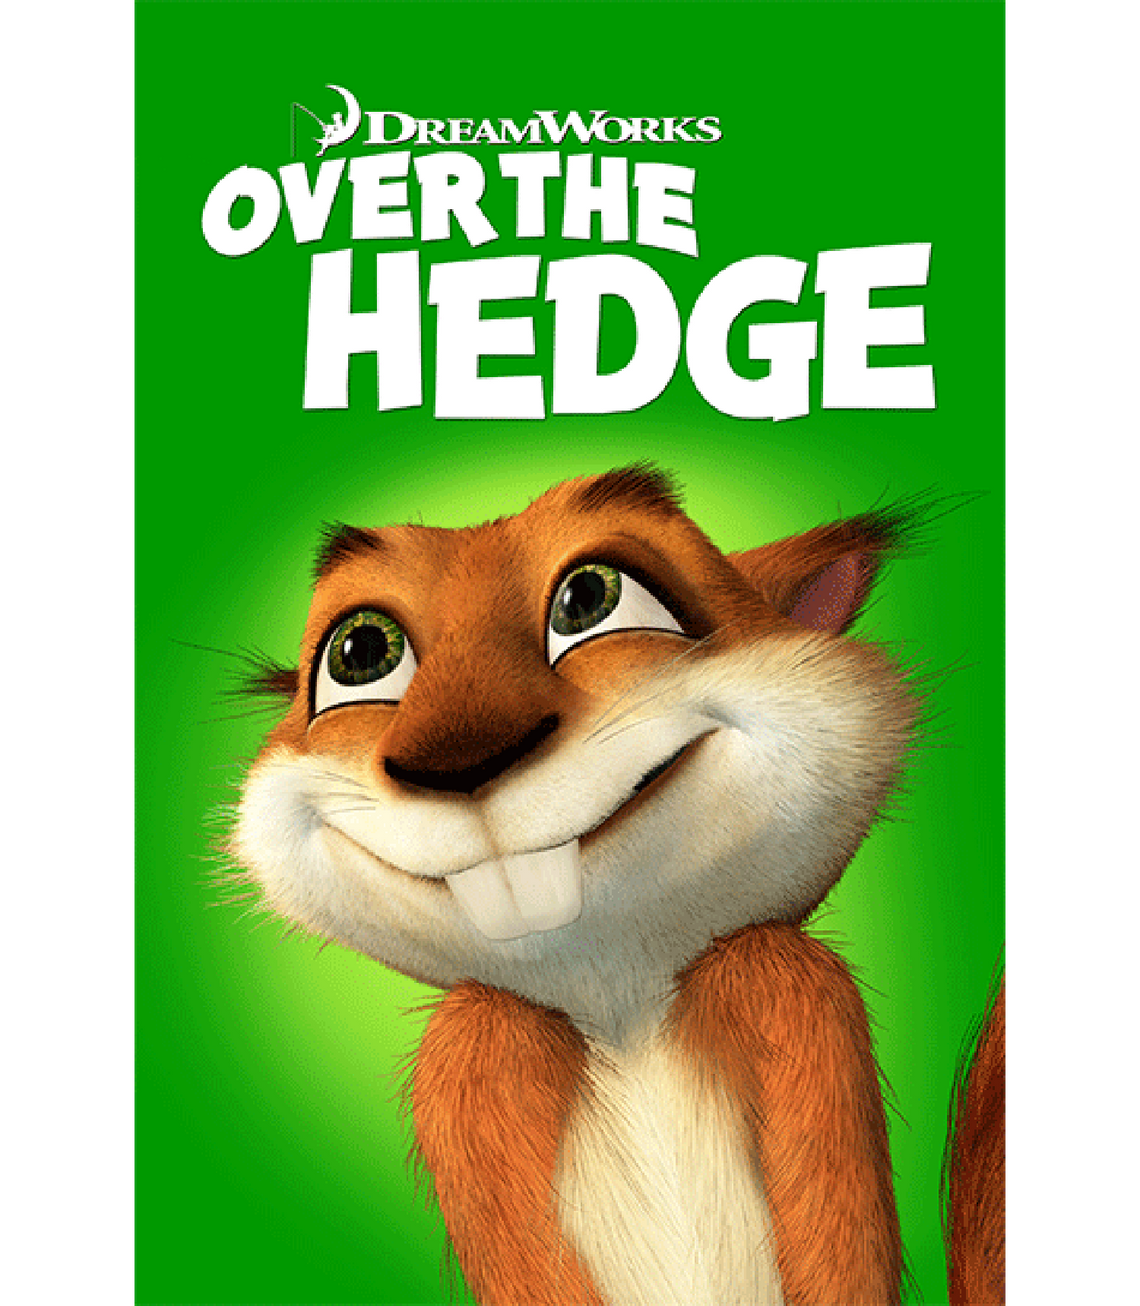 Movies & More: "Over the Hedge" and "The Last Unicorn" Showing This Weekend